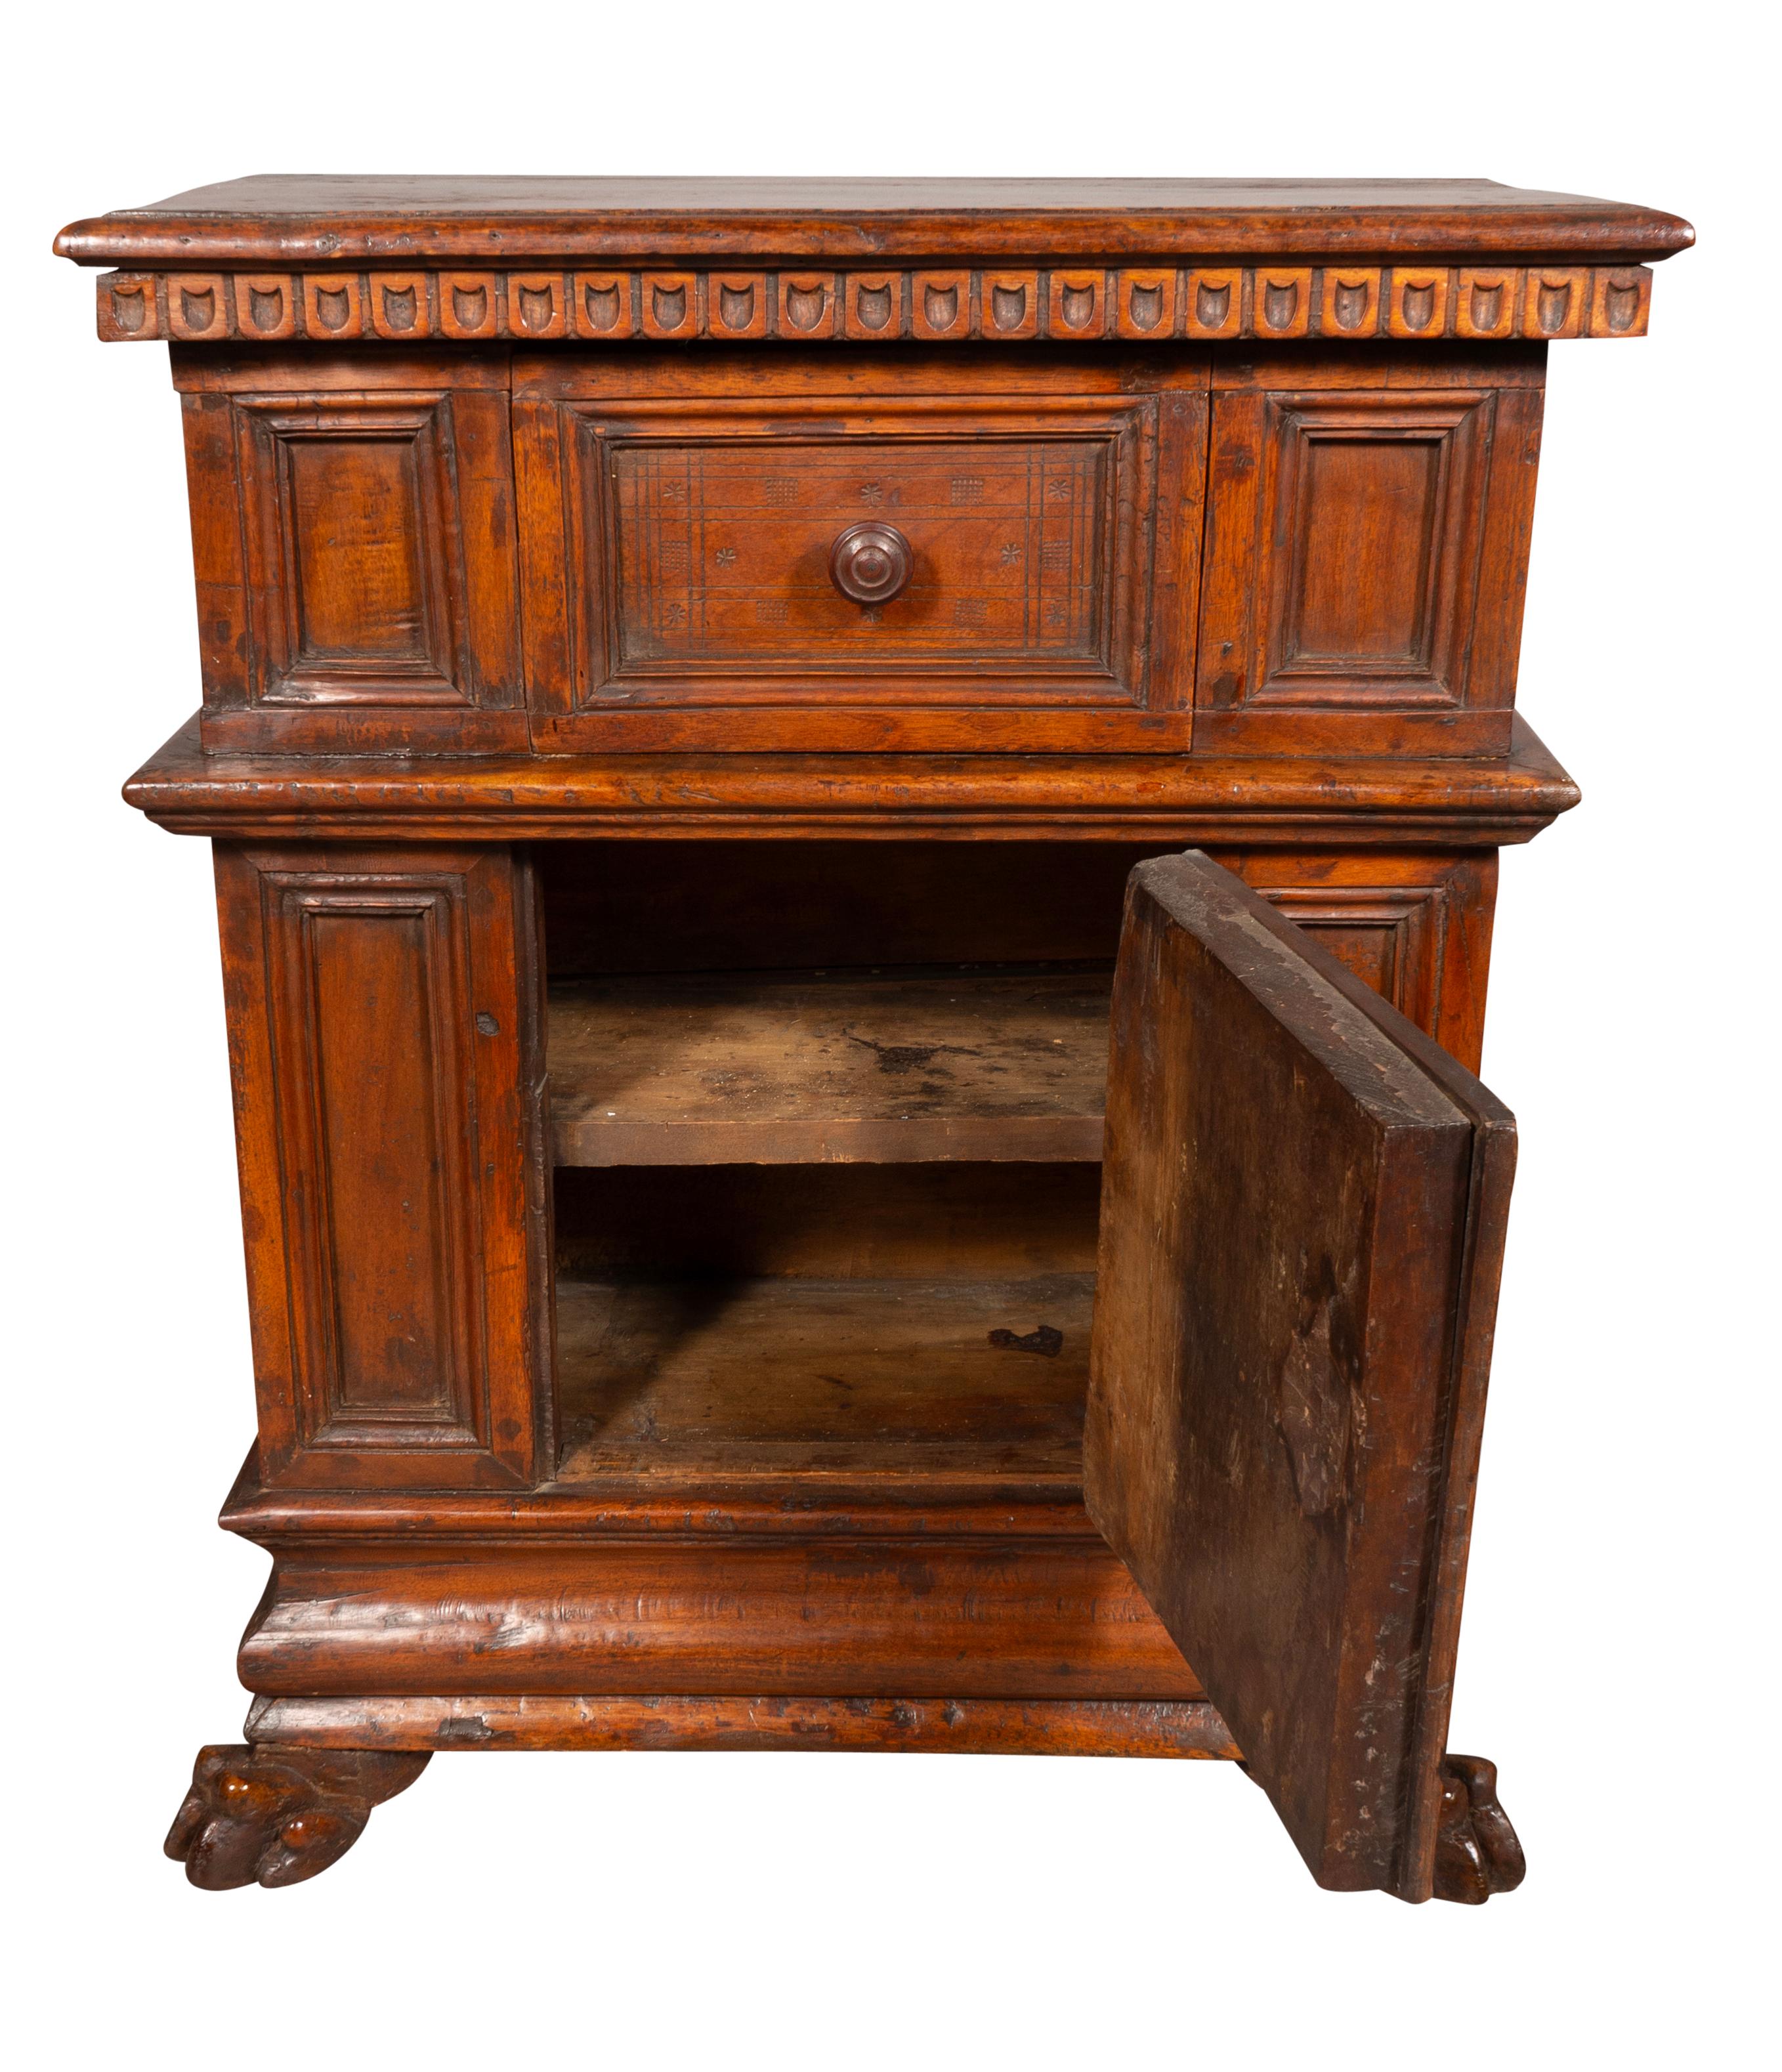 With a wonderful rich brown color and in very nice condition for its age. A rectangular top over a drawer flanked by panels over a central door with a shelf flanked by panels. Raised on paw feet. Wood knob handles.